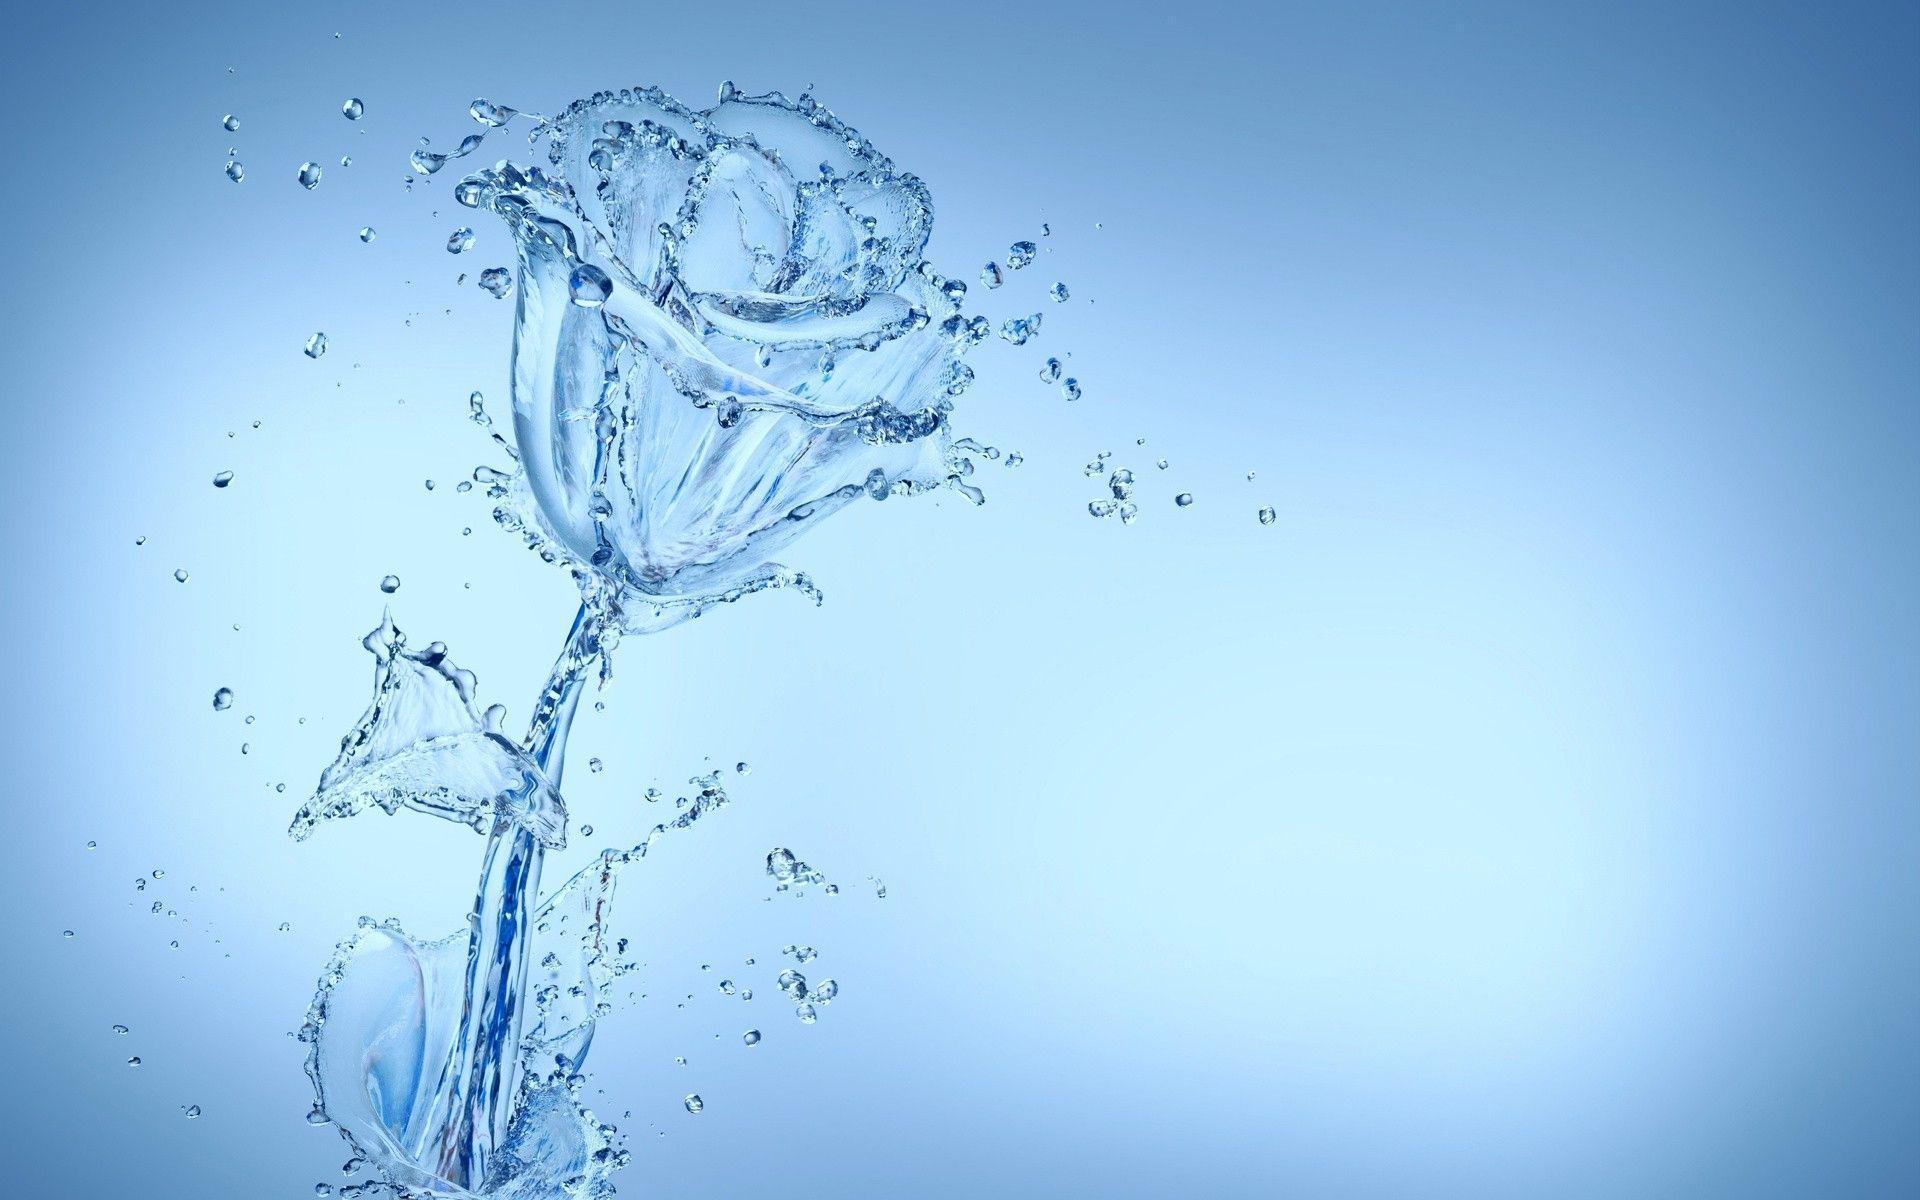 Wallpaper For > Flower And Water Background Wallpaper